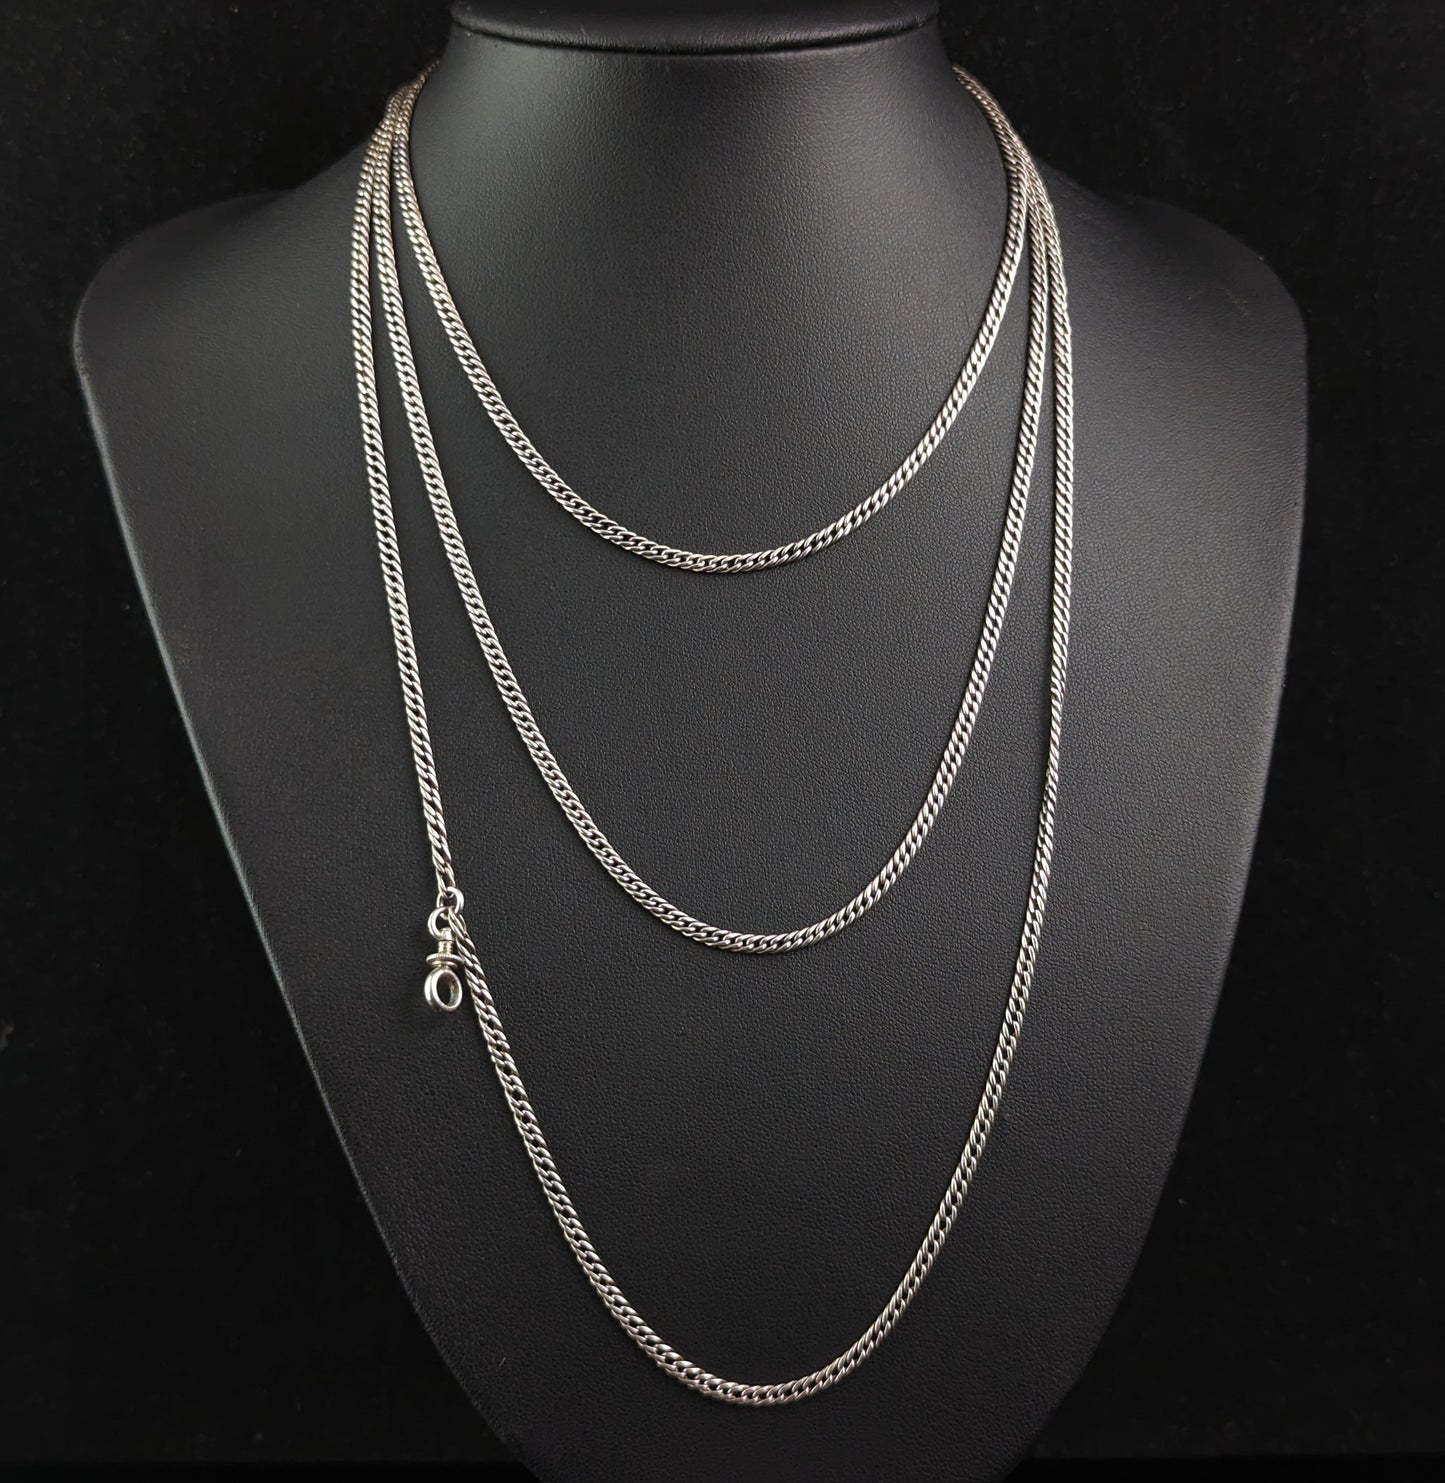 Antique sterling silver long chain necklace, Victorian